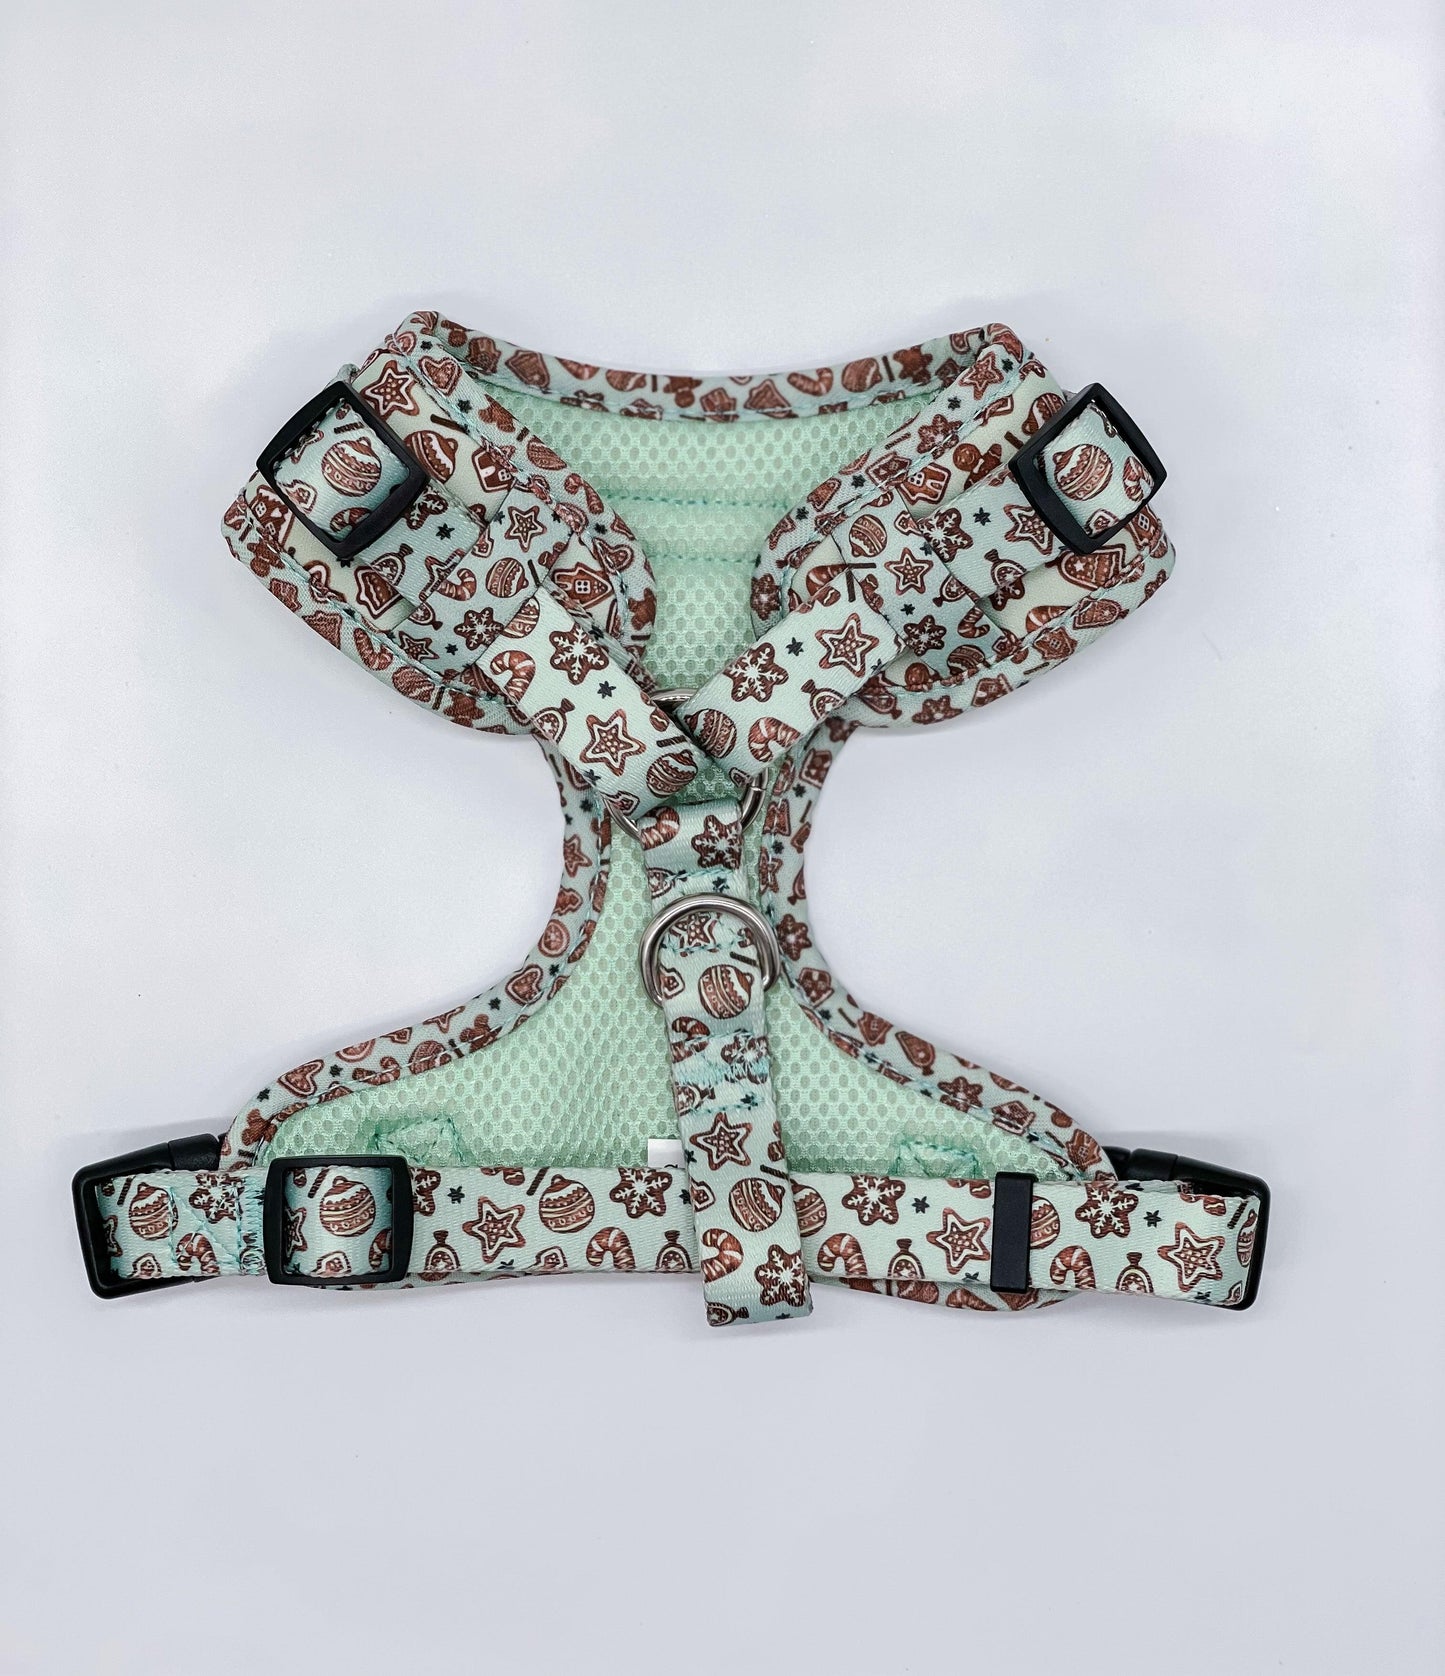 Adjustable Dog Harness | Soft & Comfortable dog harness | Oh Crumbs it’s Christmas - Woof Frills